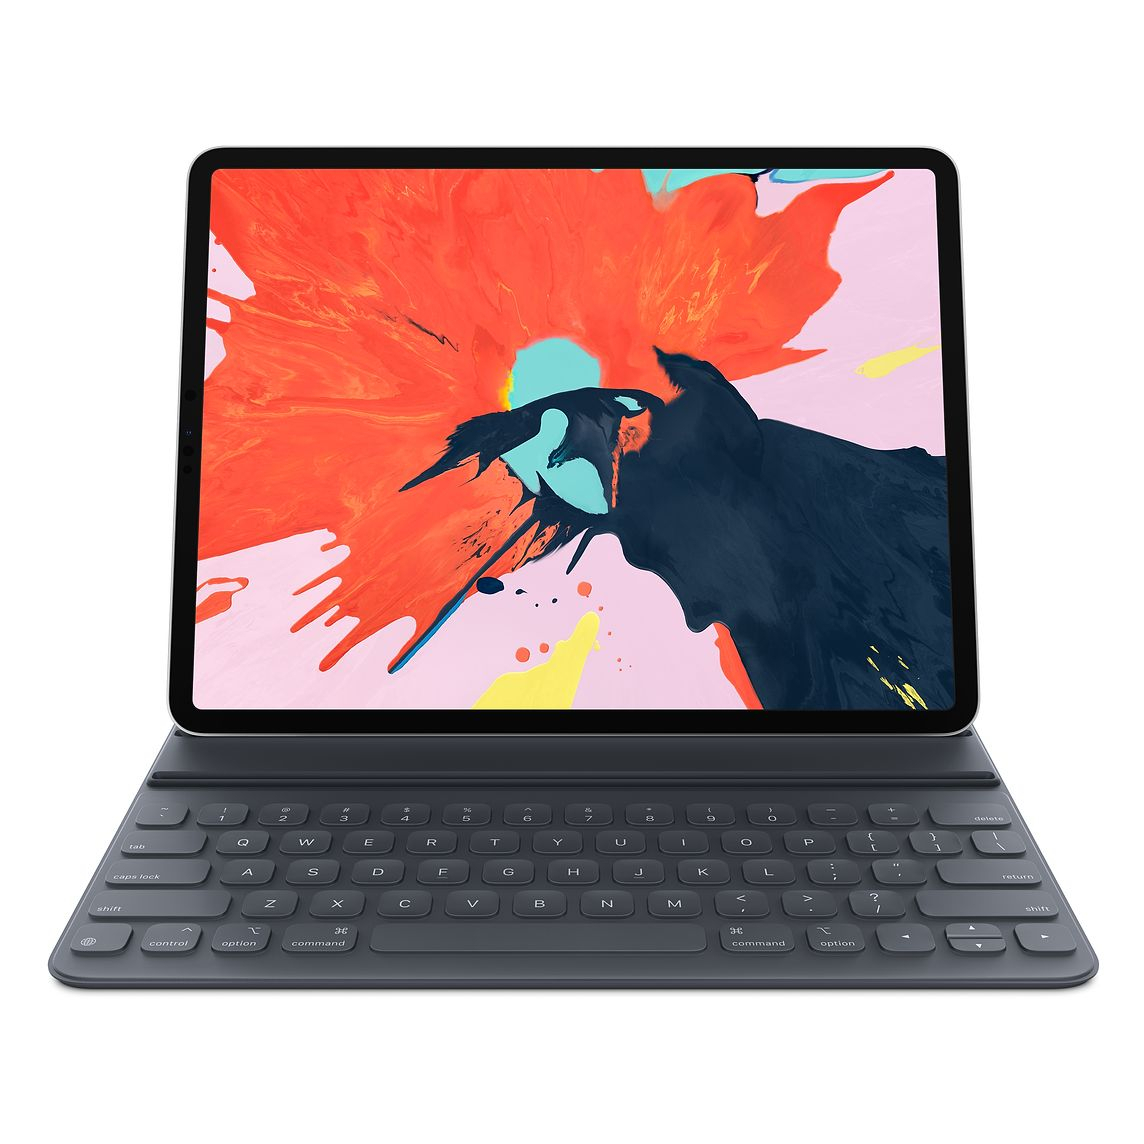 Apple lists 4 iPad Pro models on its official website for China